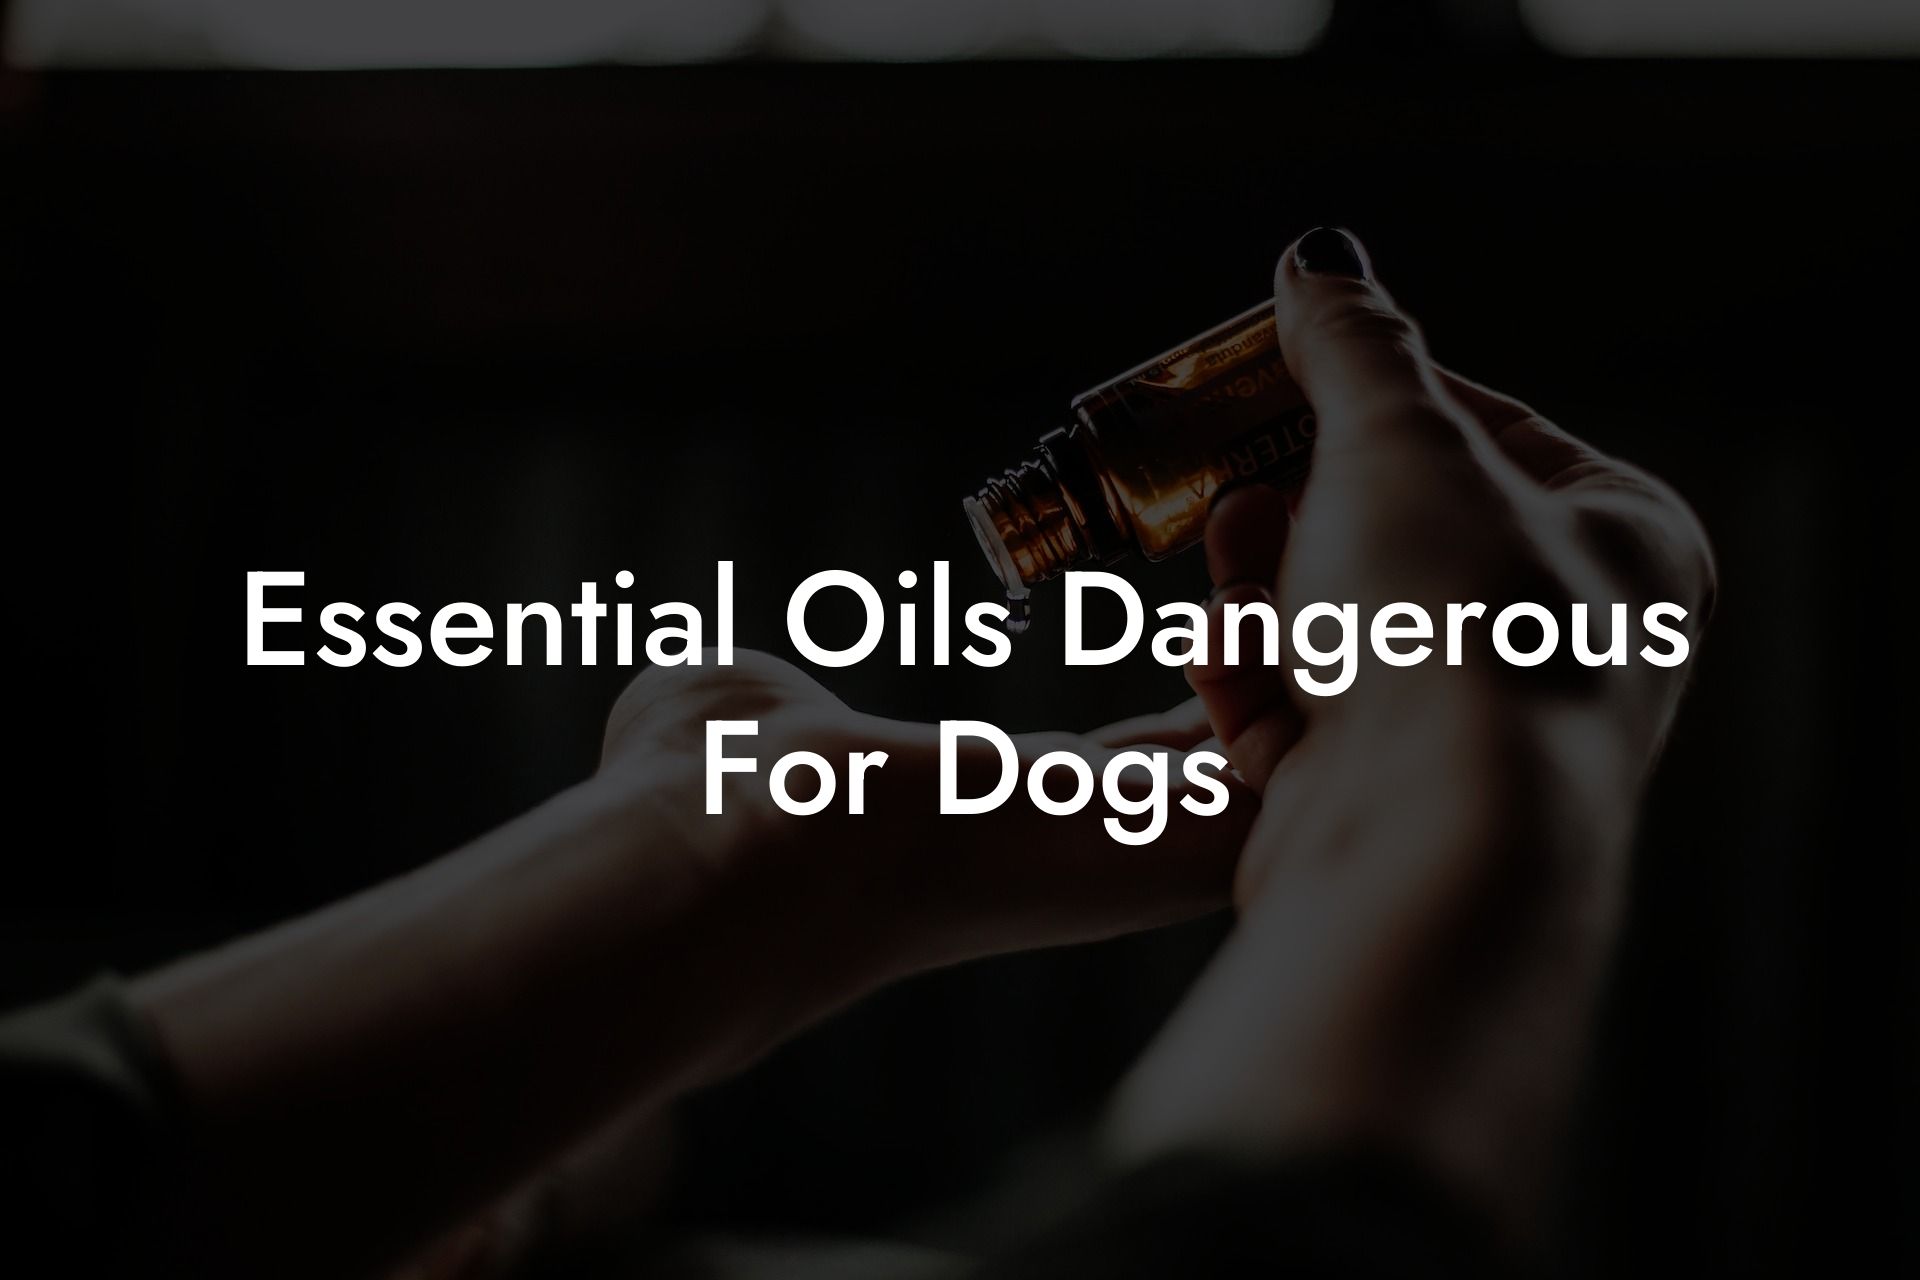 Essential Oils Dangerous For Dogs